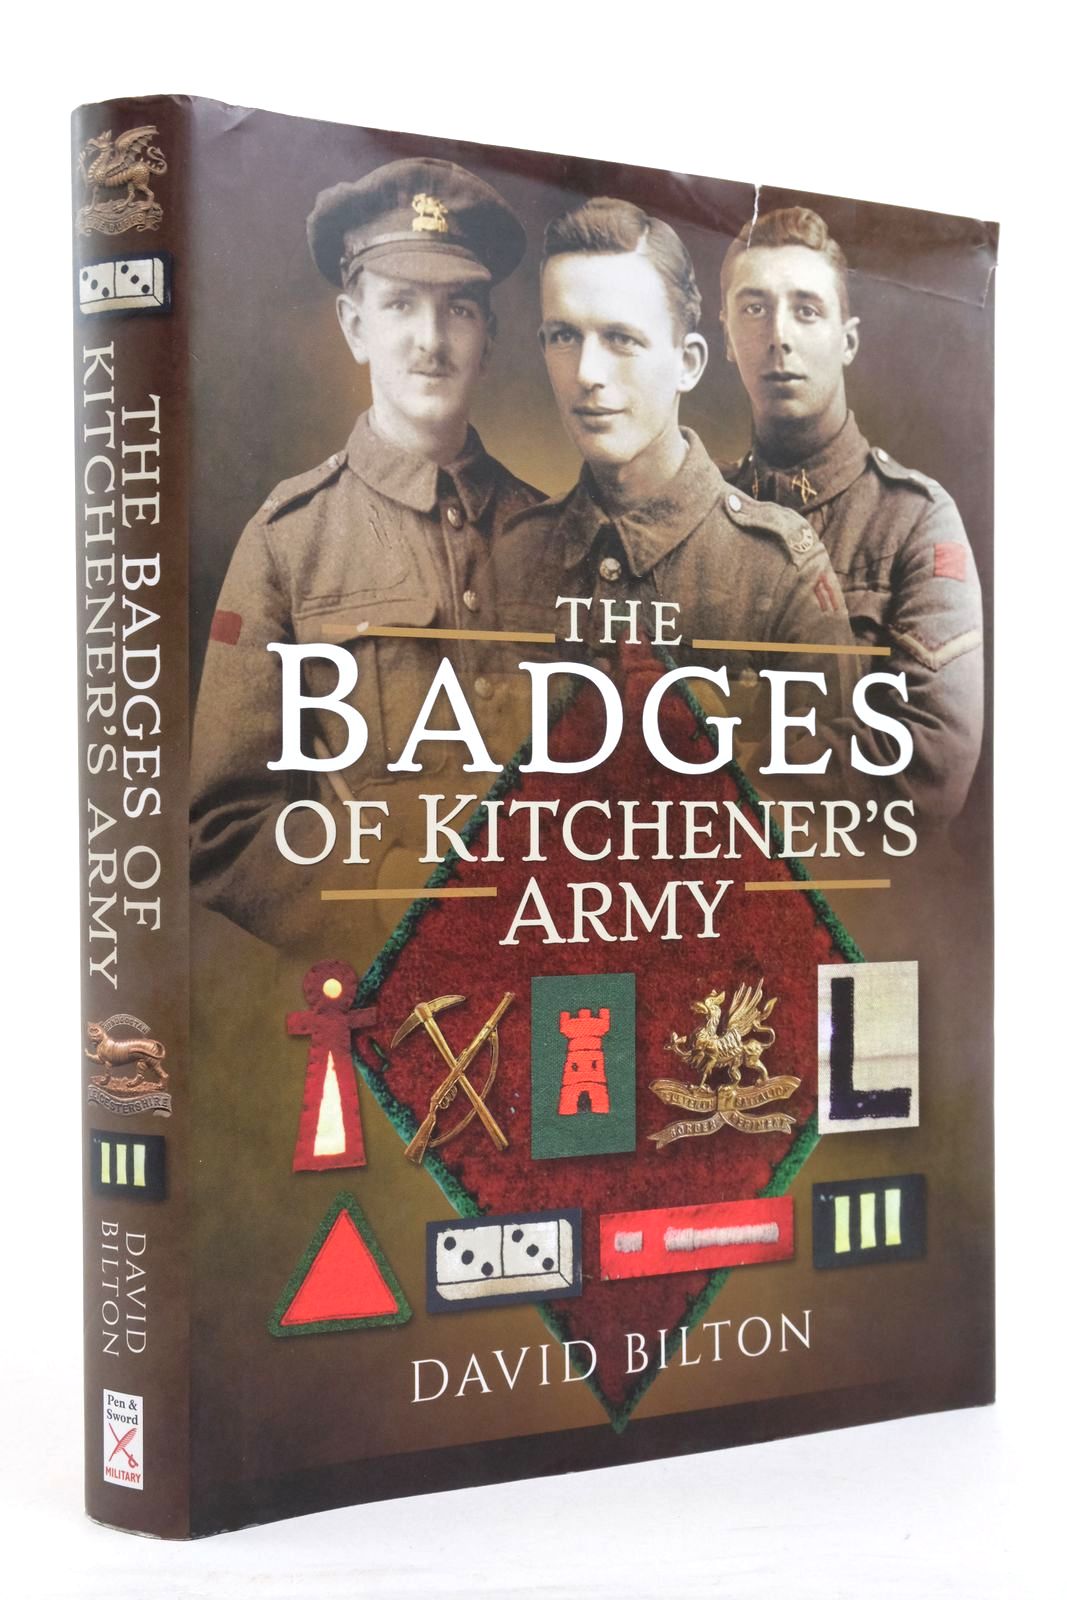 Photo of THE BADGES OF KITCHENER'S ARMY - INFANTRY- Stock Number: 2138362